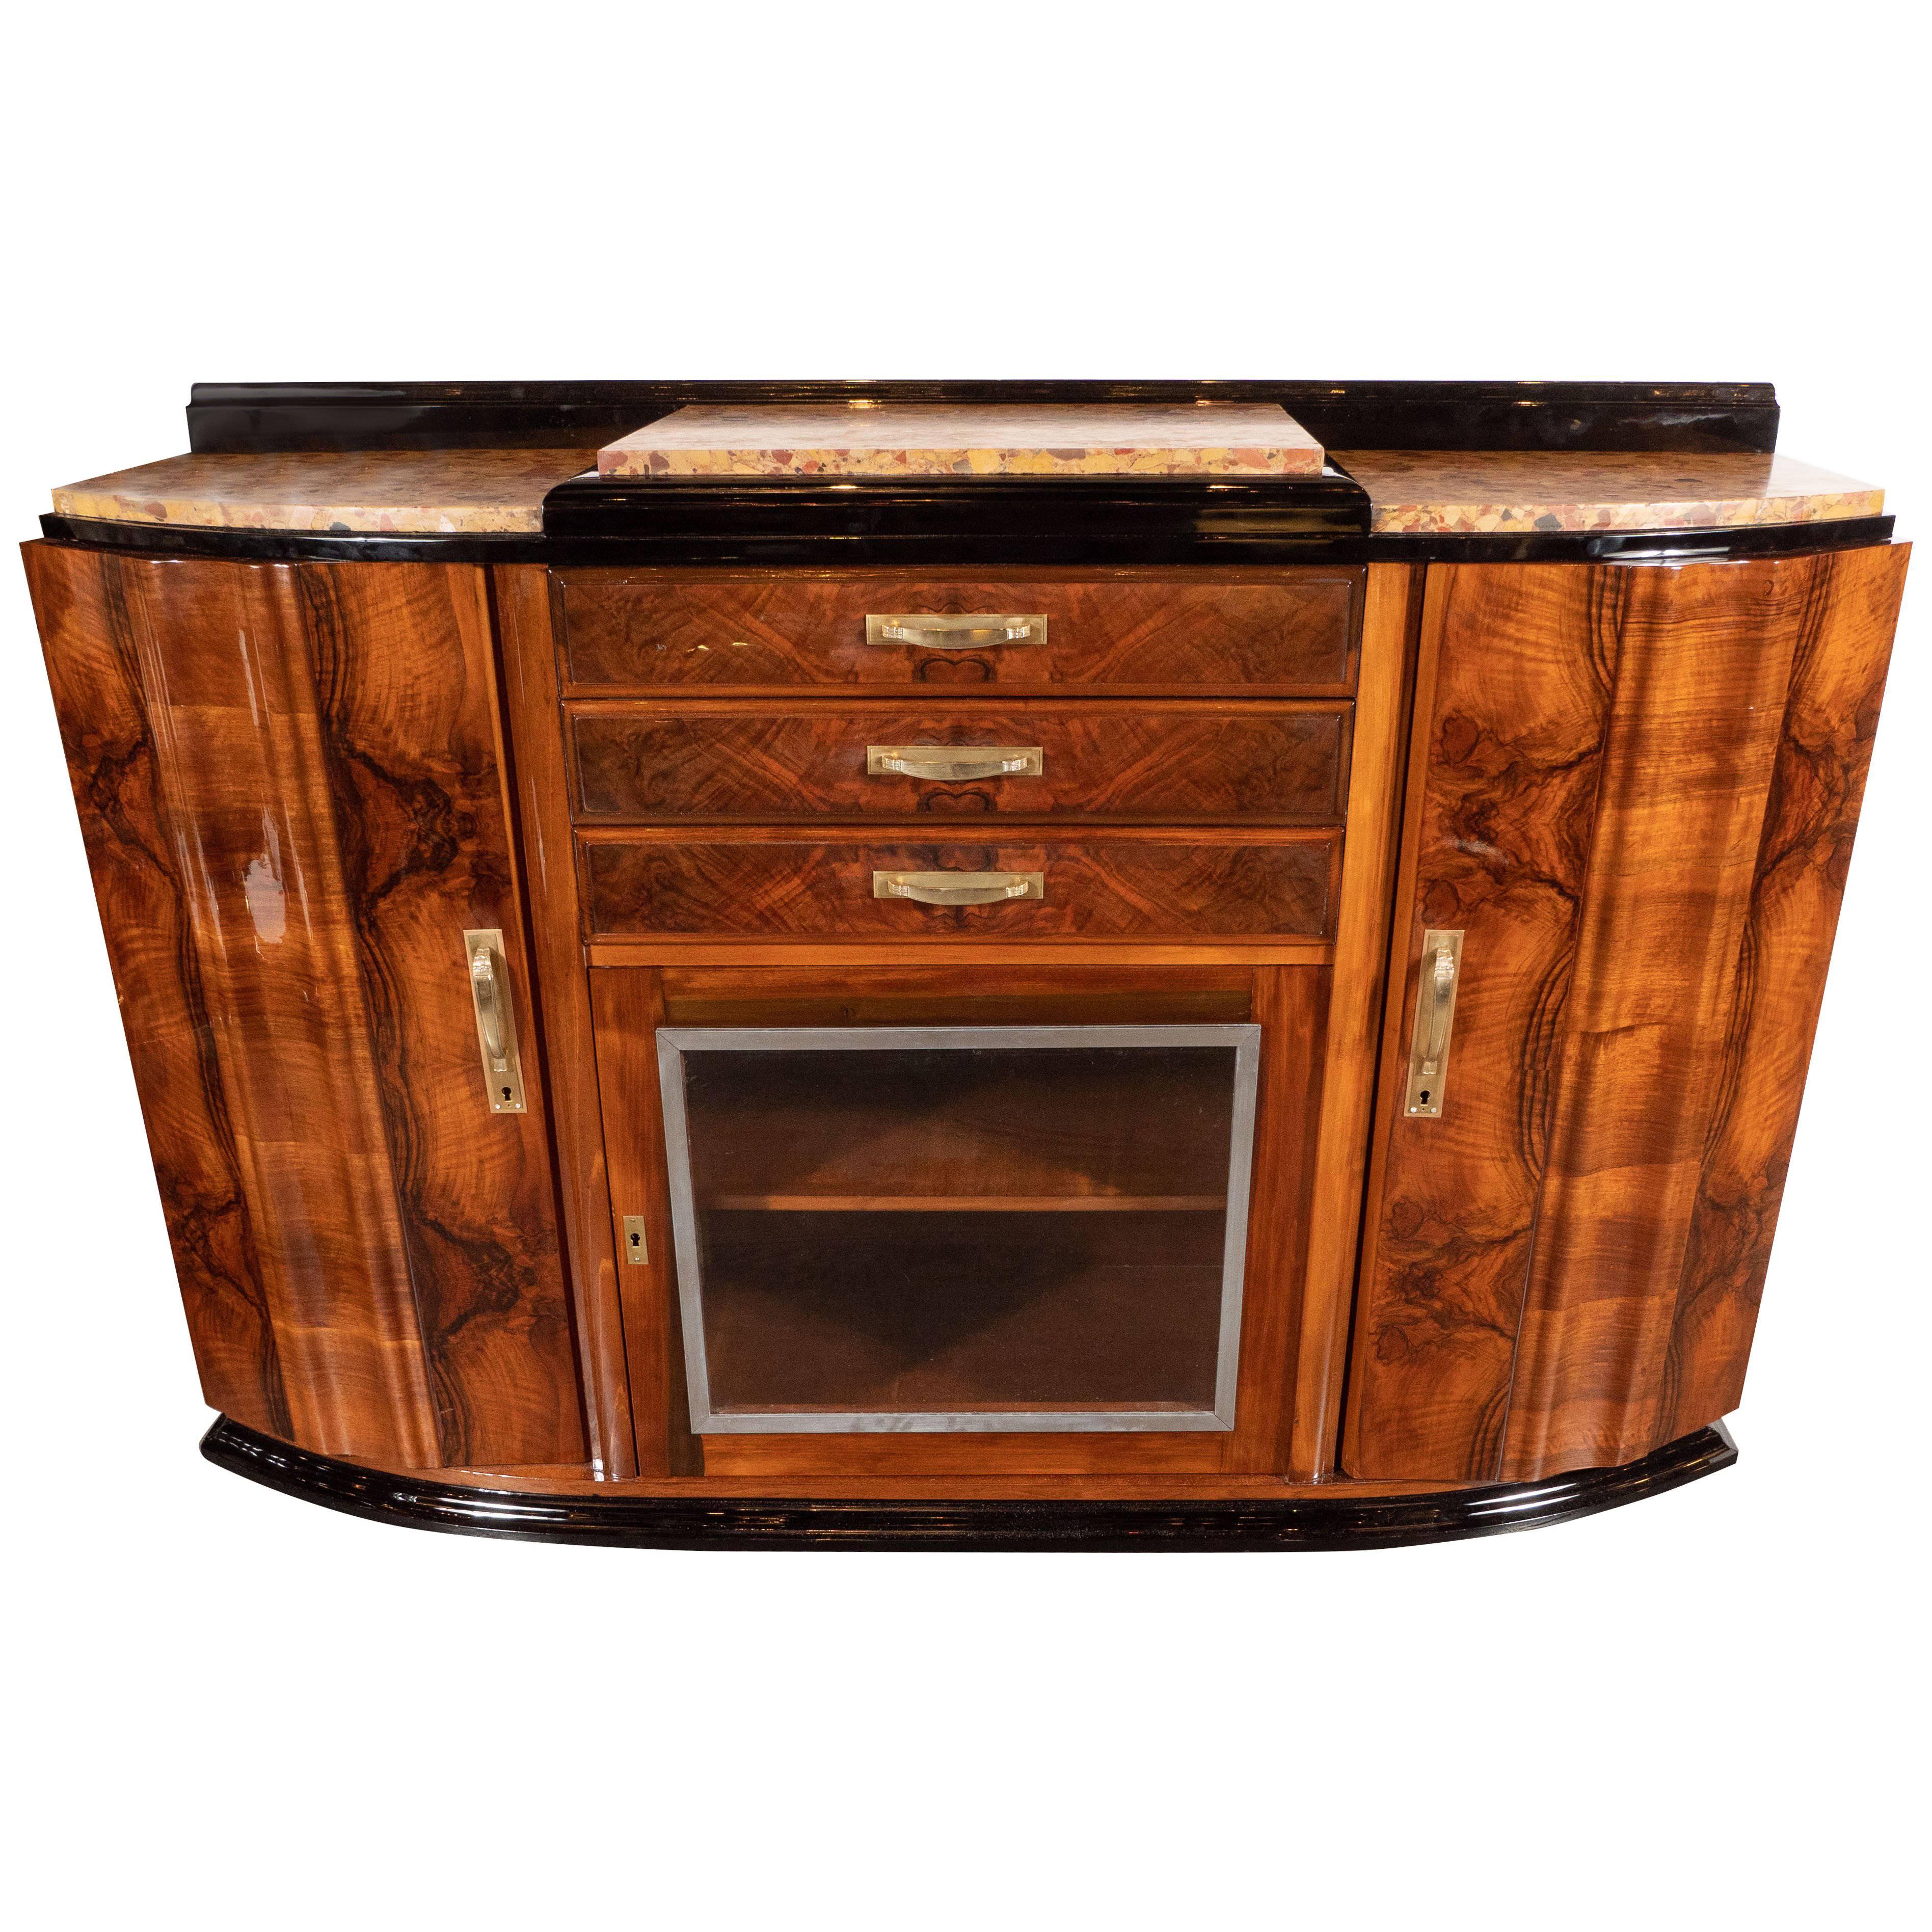 Art Deco Sideboard or Cabinet in Burled Walnut, Exotic Marble and Black Lacquer